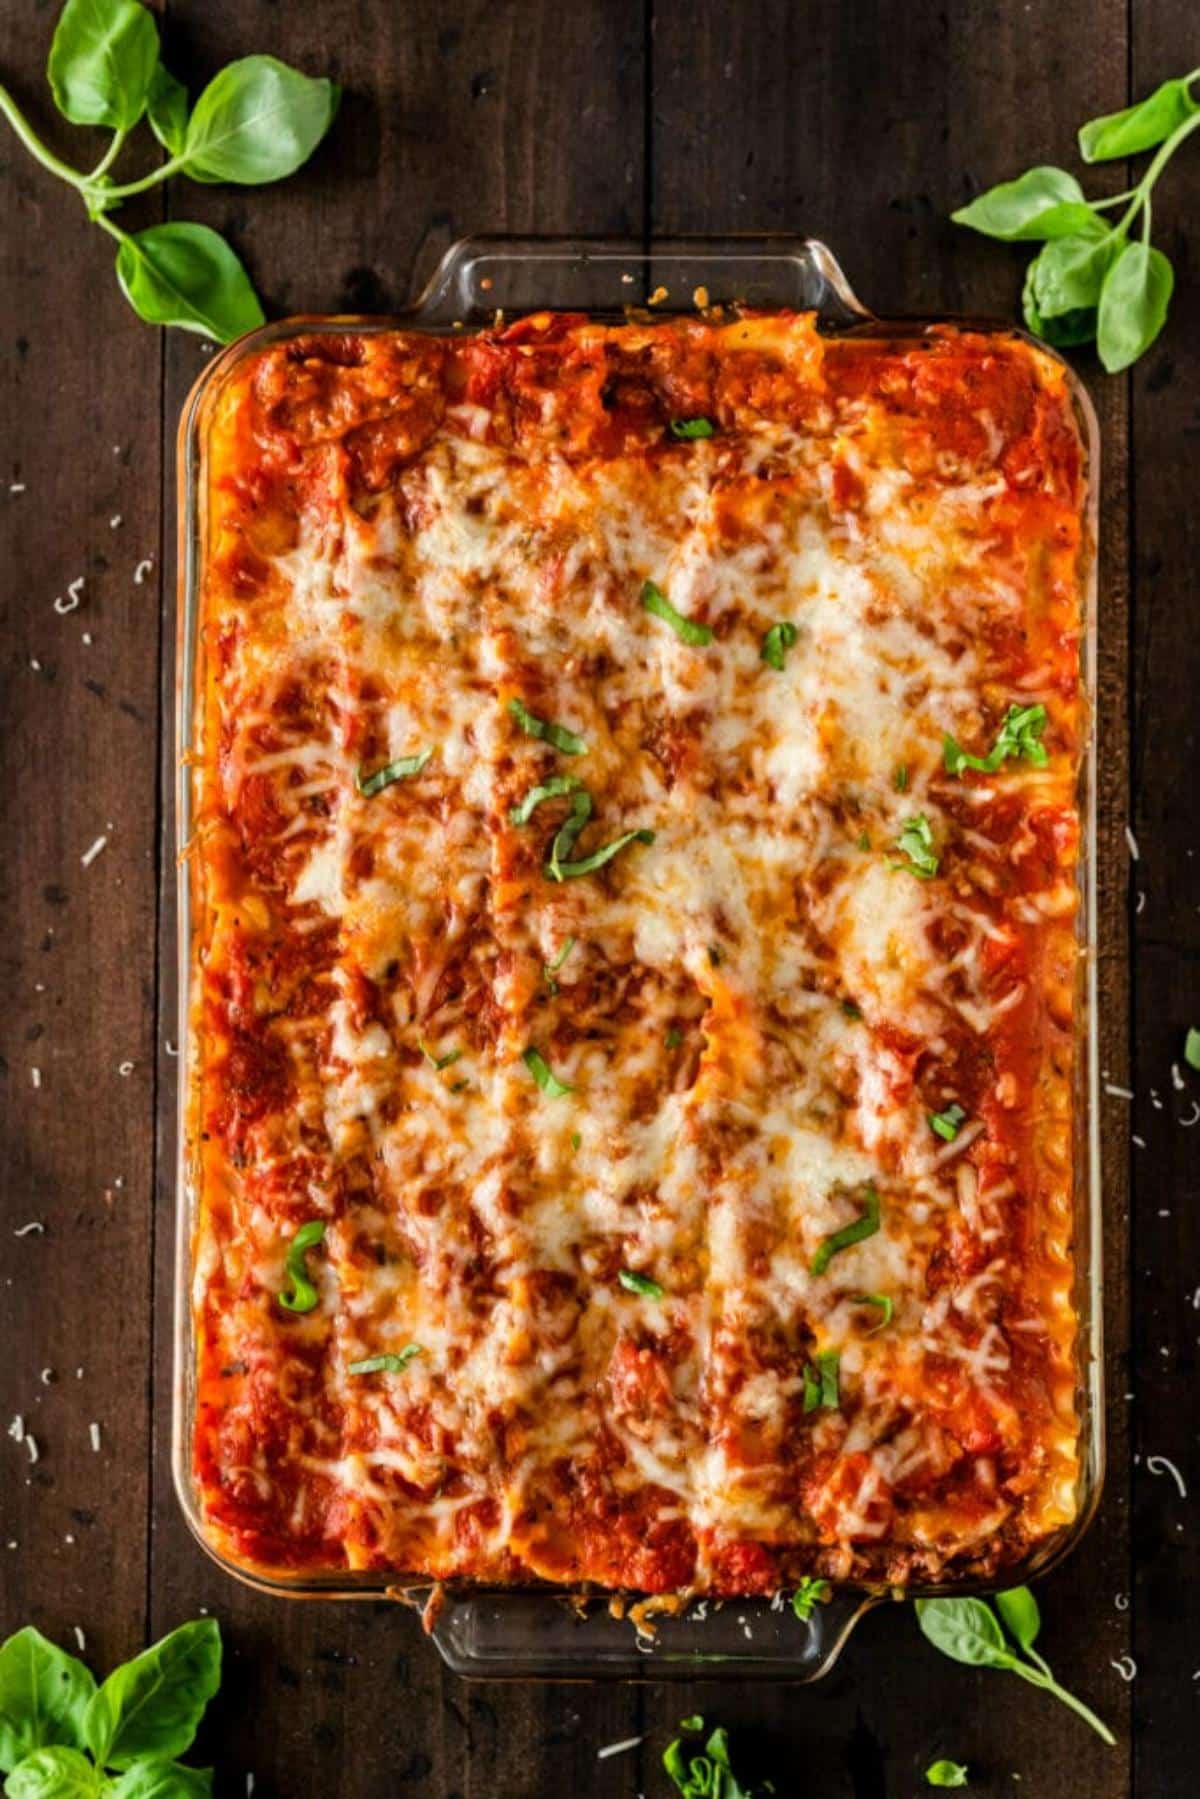 Homemade Lasagna Recipe with Ground Beef in a glass dish on a wooden table.